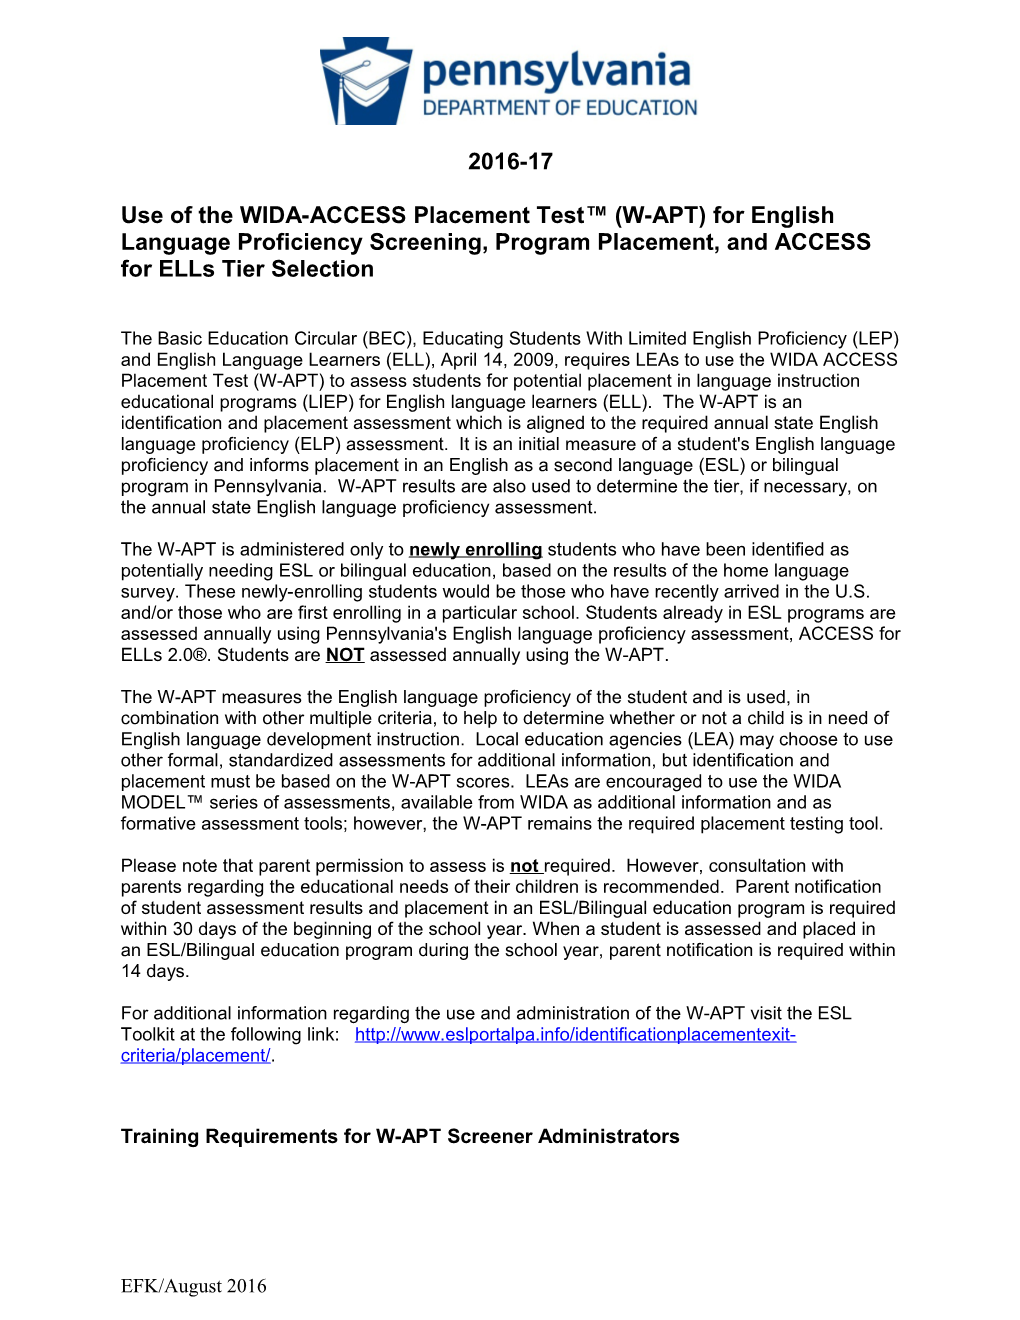 Use of the WIDA-ACCESS Placement Test (W-APT) for English Language Proficiency Screening